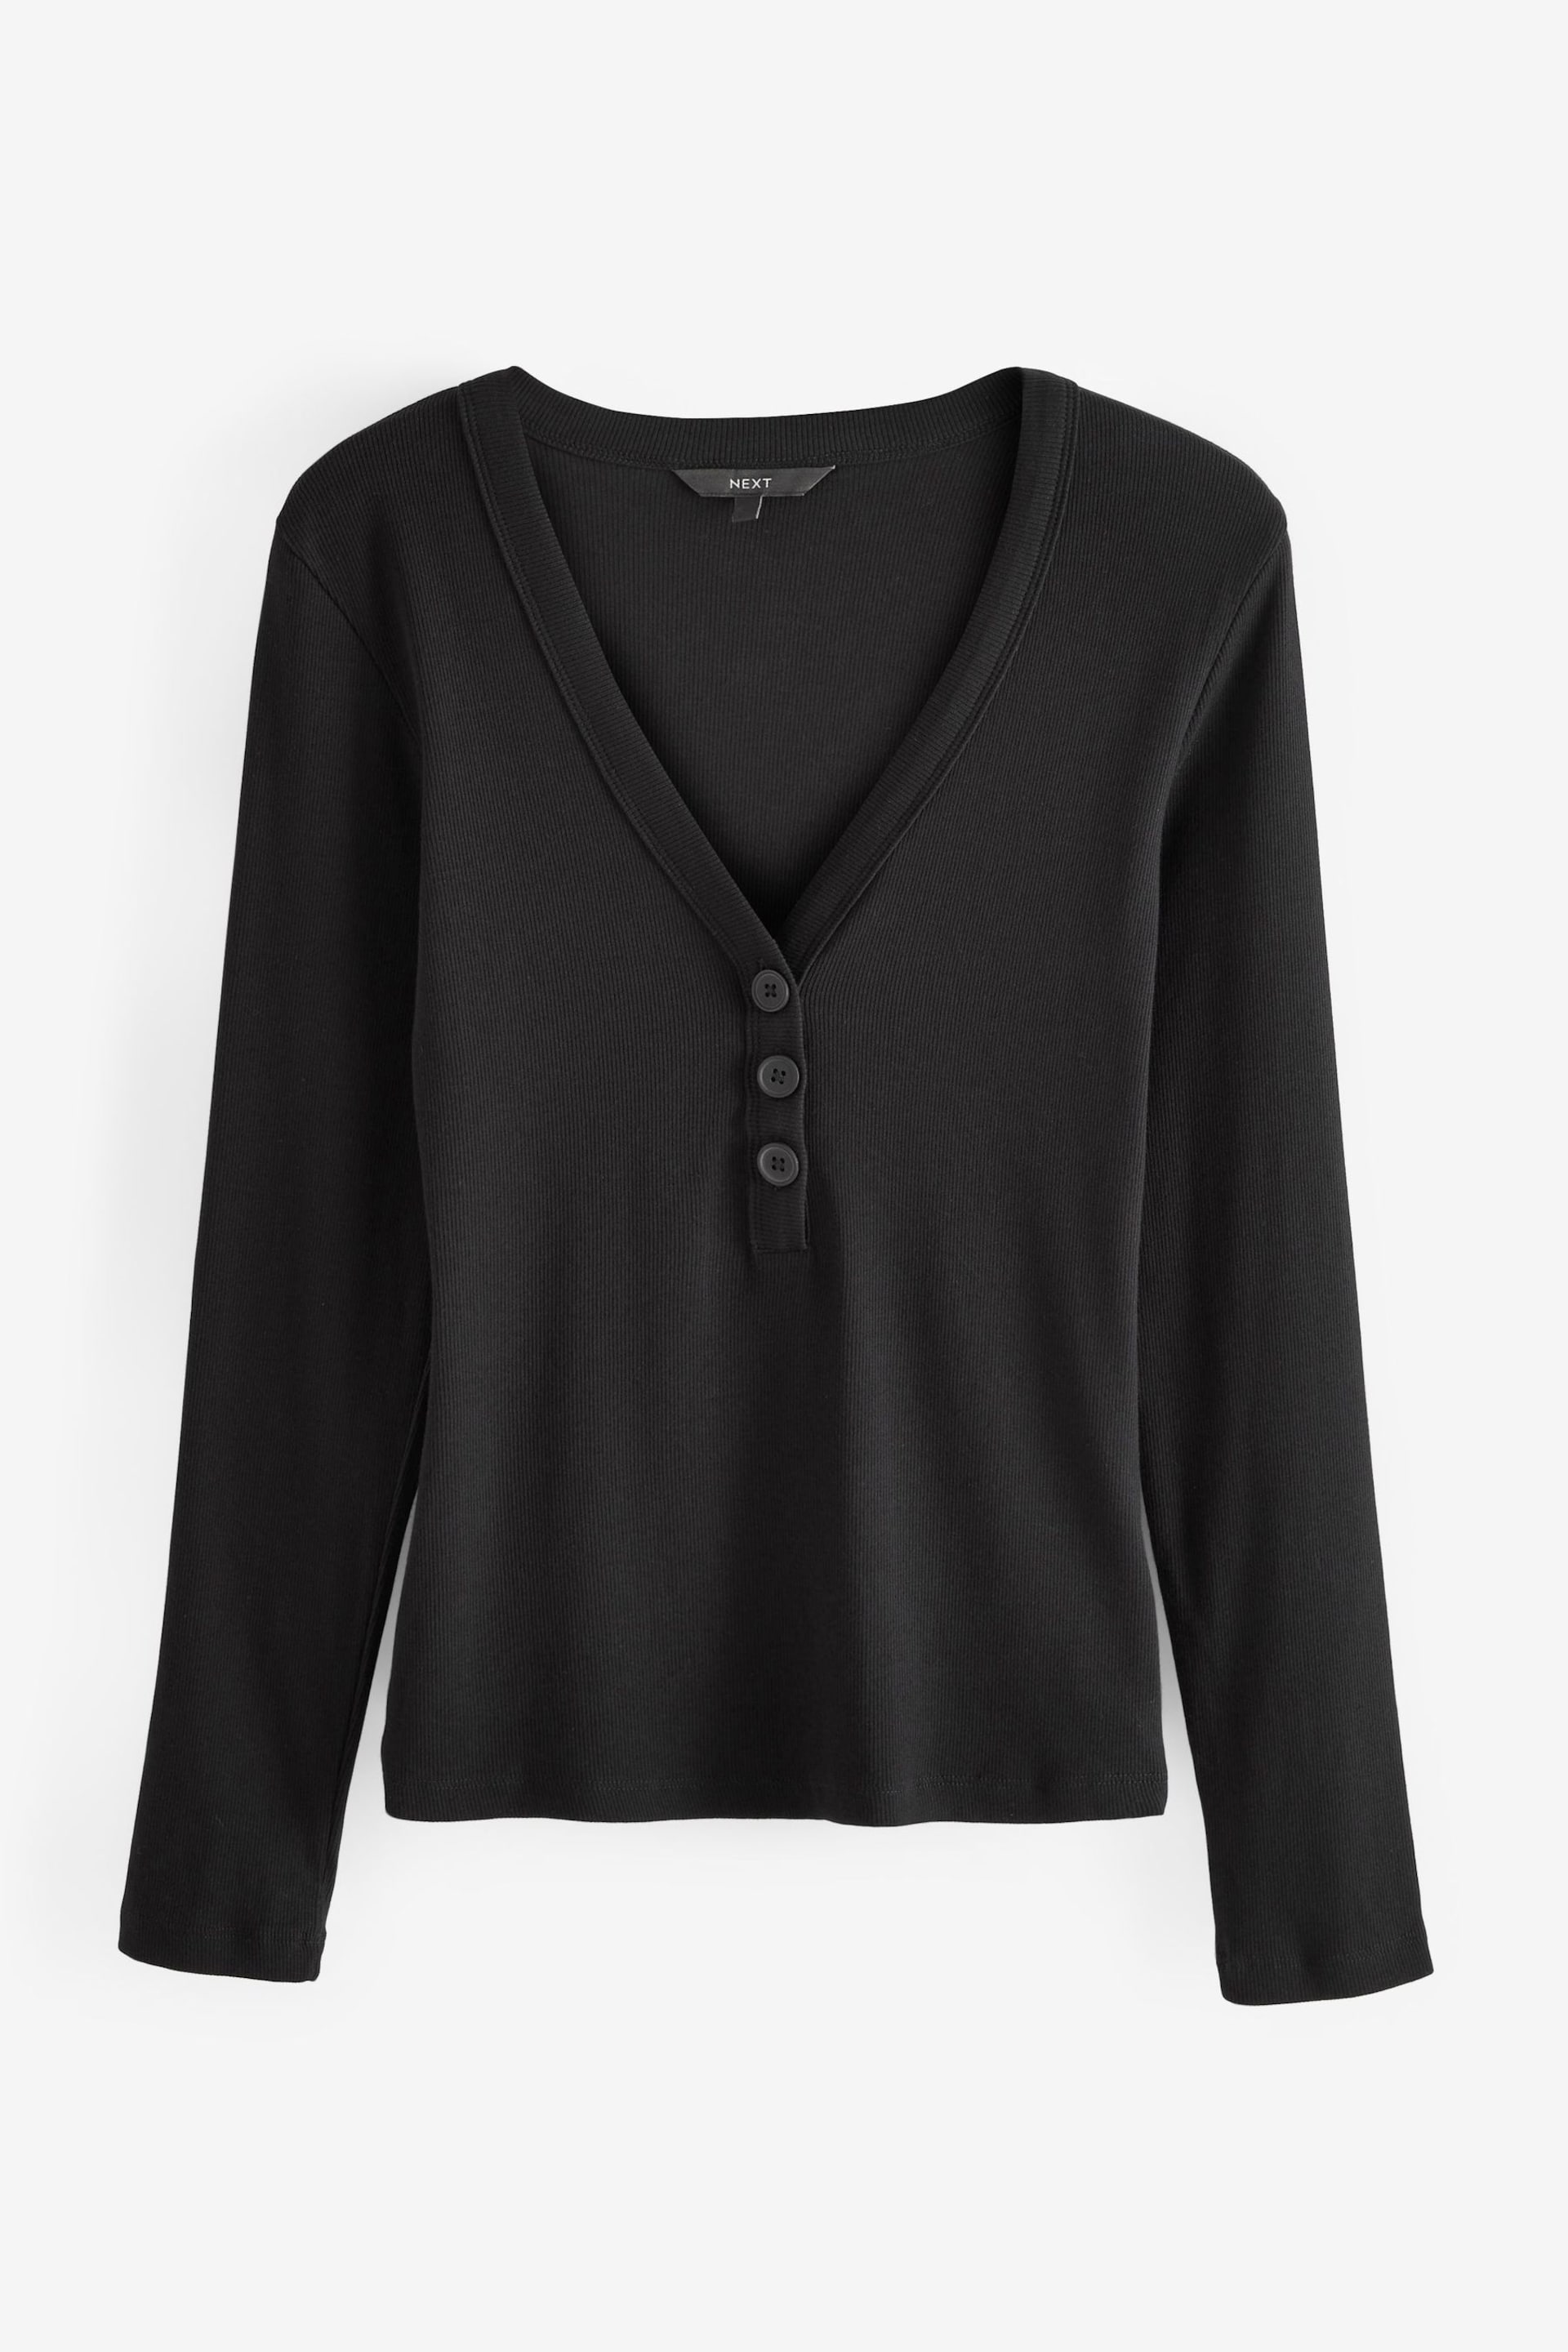 Black Long Sleeve Ribbed Henley Button Top - Image 5 of 5